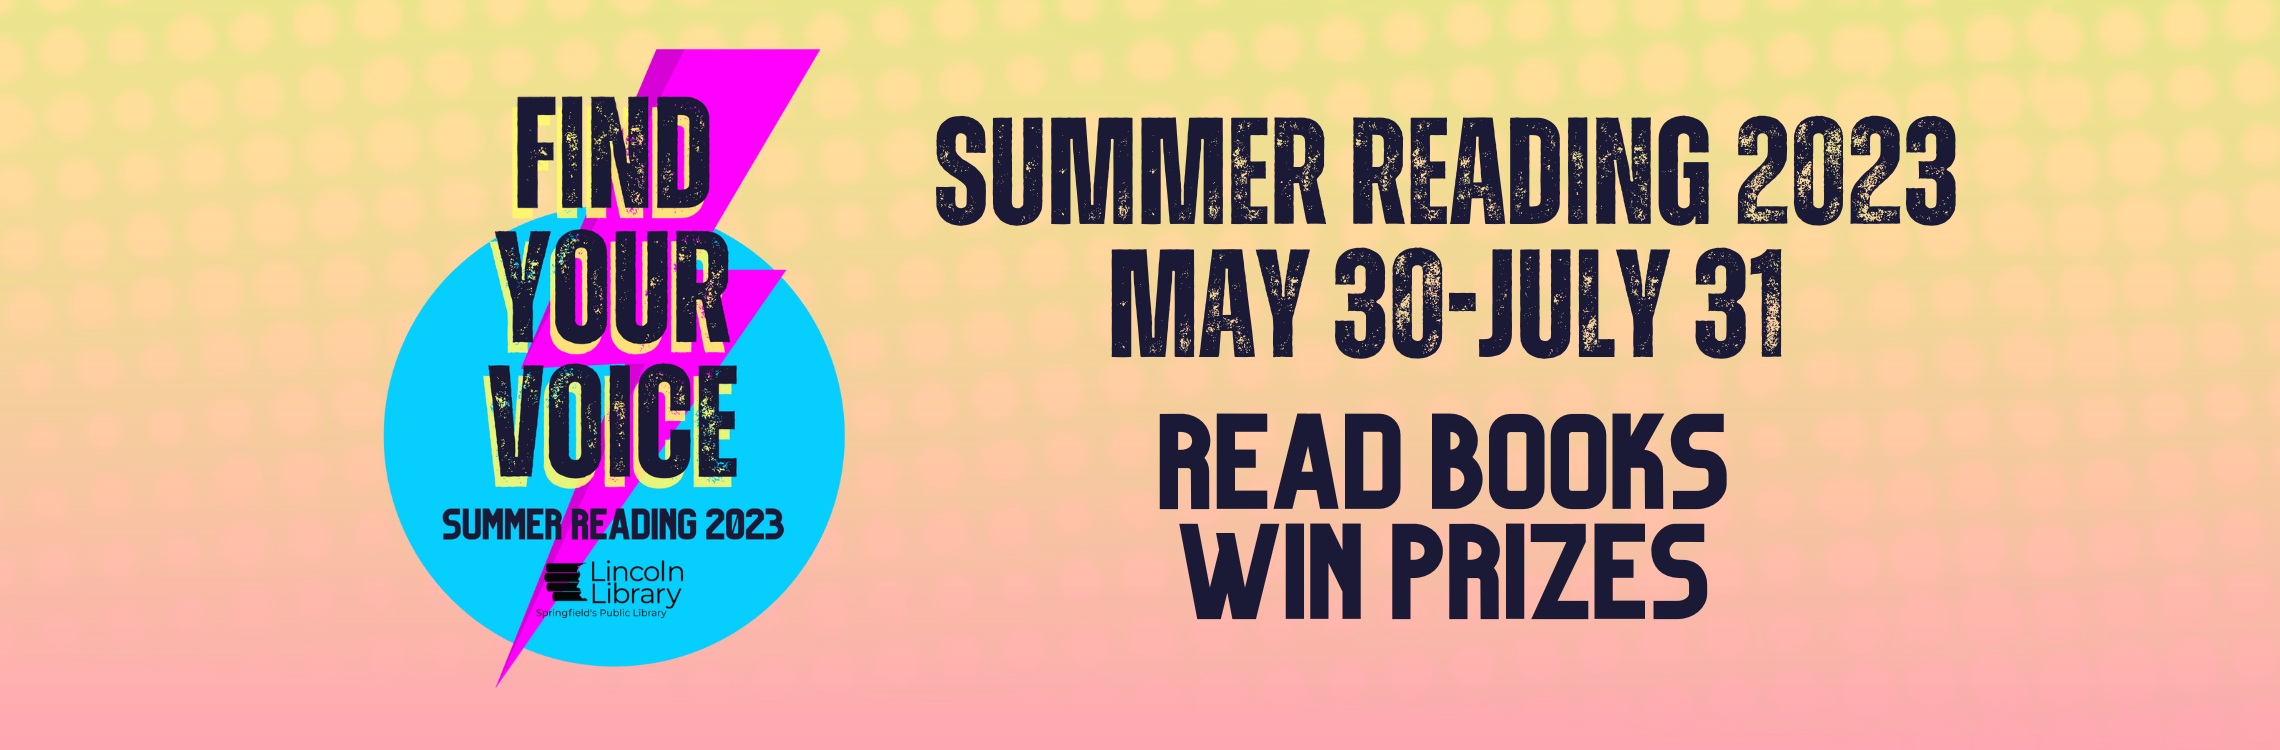 Summer reading 2023 May 30-July 31. Read books, win prizes